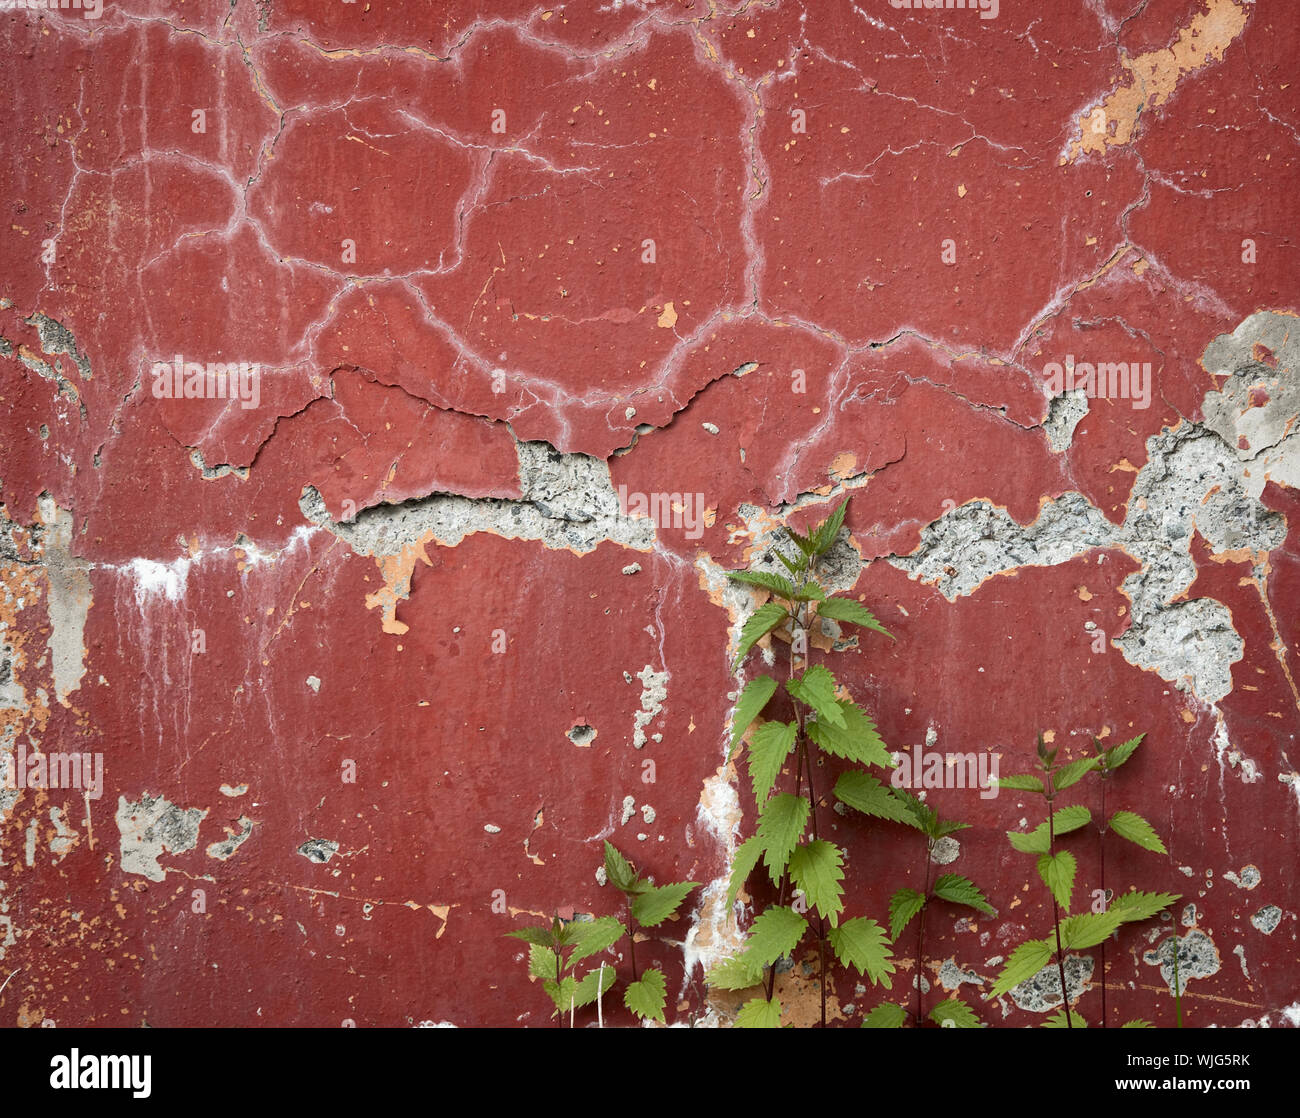 Old red wall with cracks and nettle runaways Stock Photo